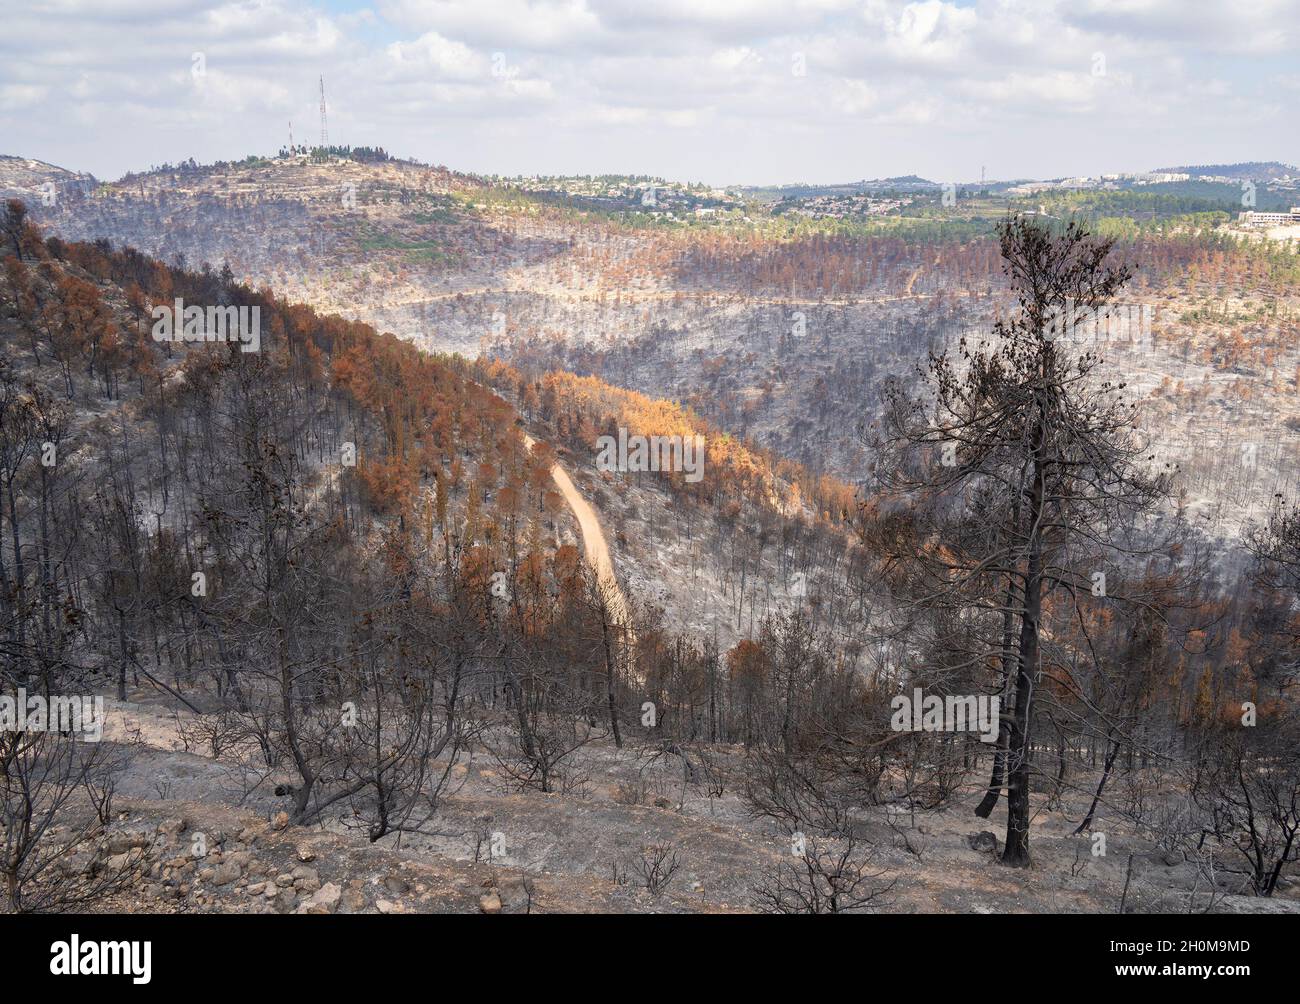 Burnt trees after a wildfire in the mediterranean woodland on the Judea mountains near Jerusalem, Israel. Stock Photo